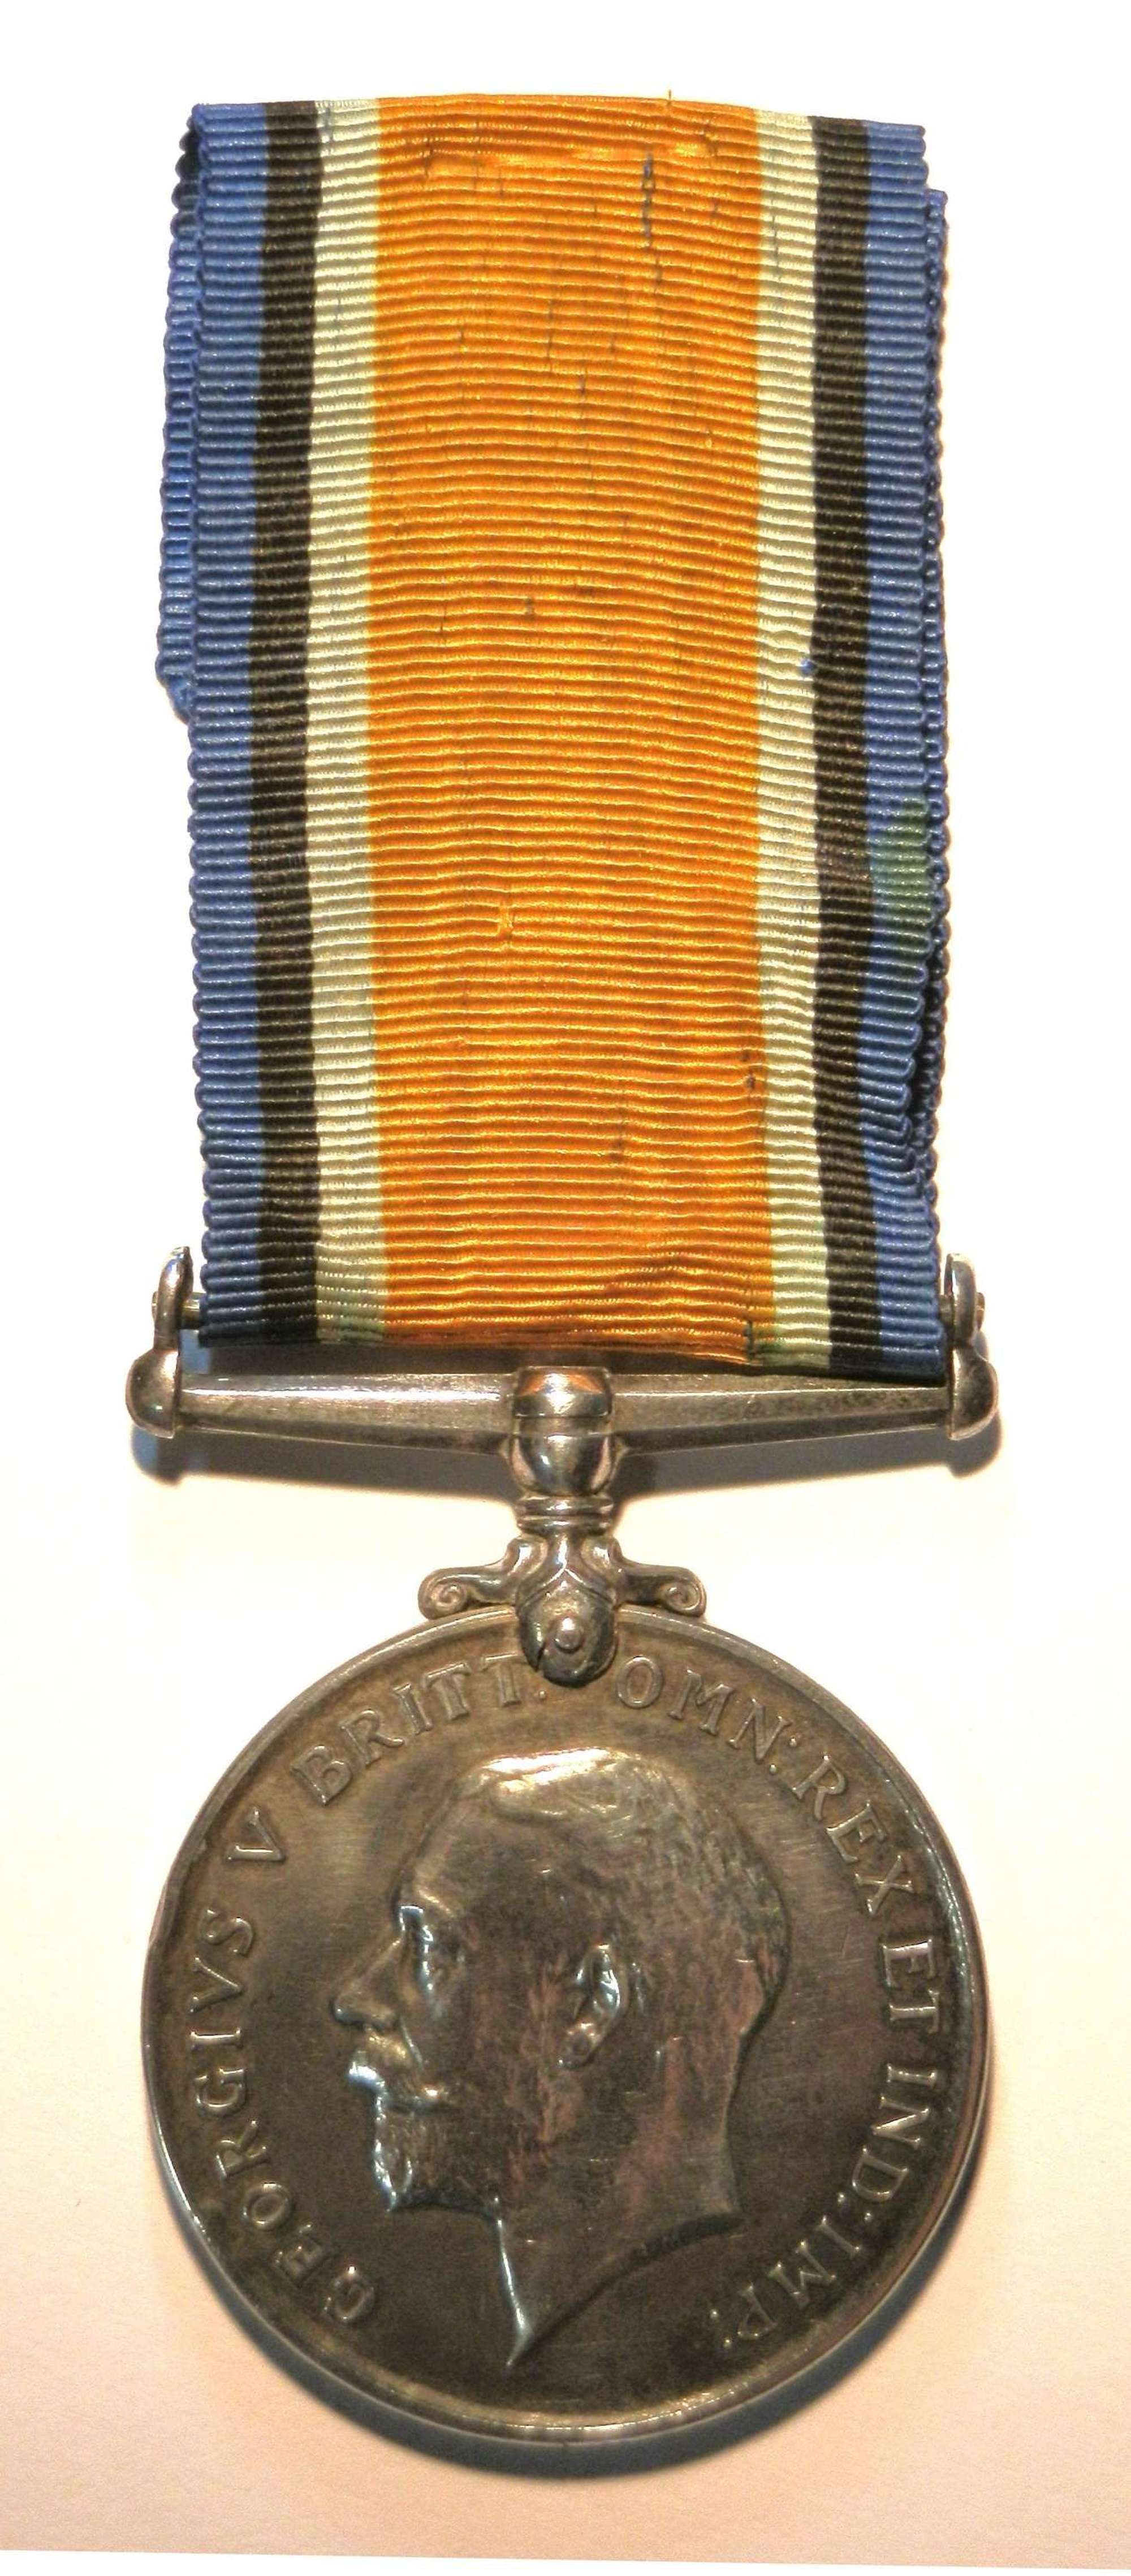 British War Medal. Private. F. Koepstadt. 1st Cape Corps.